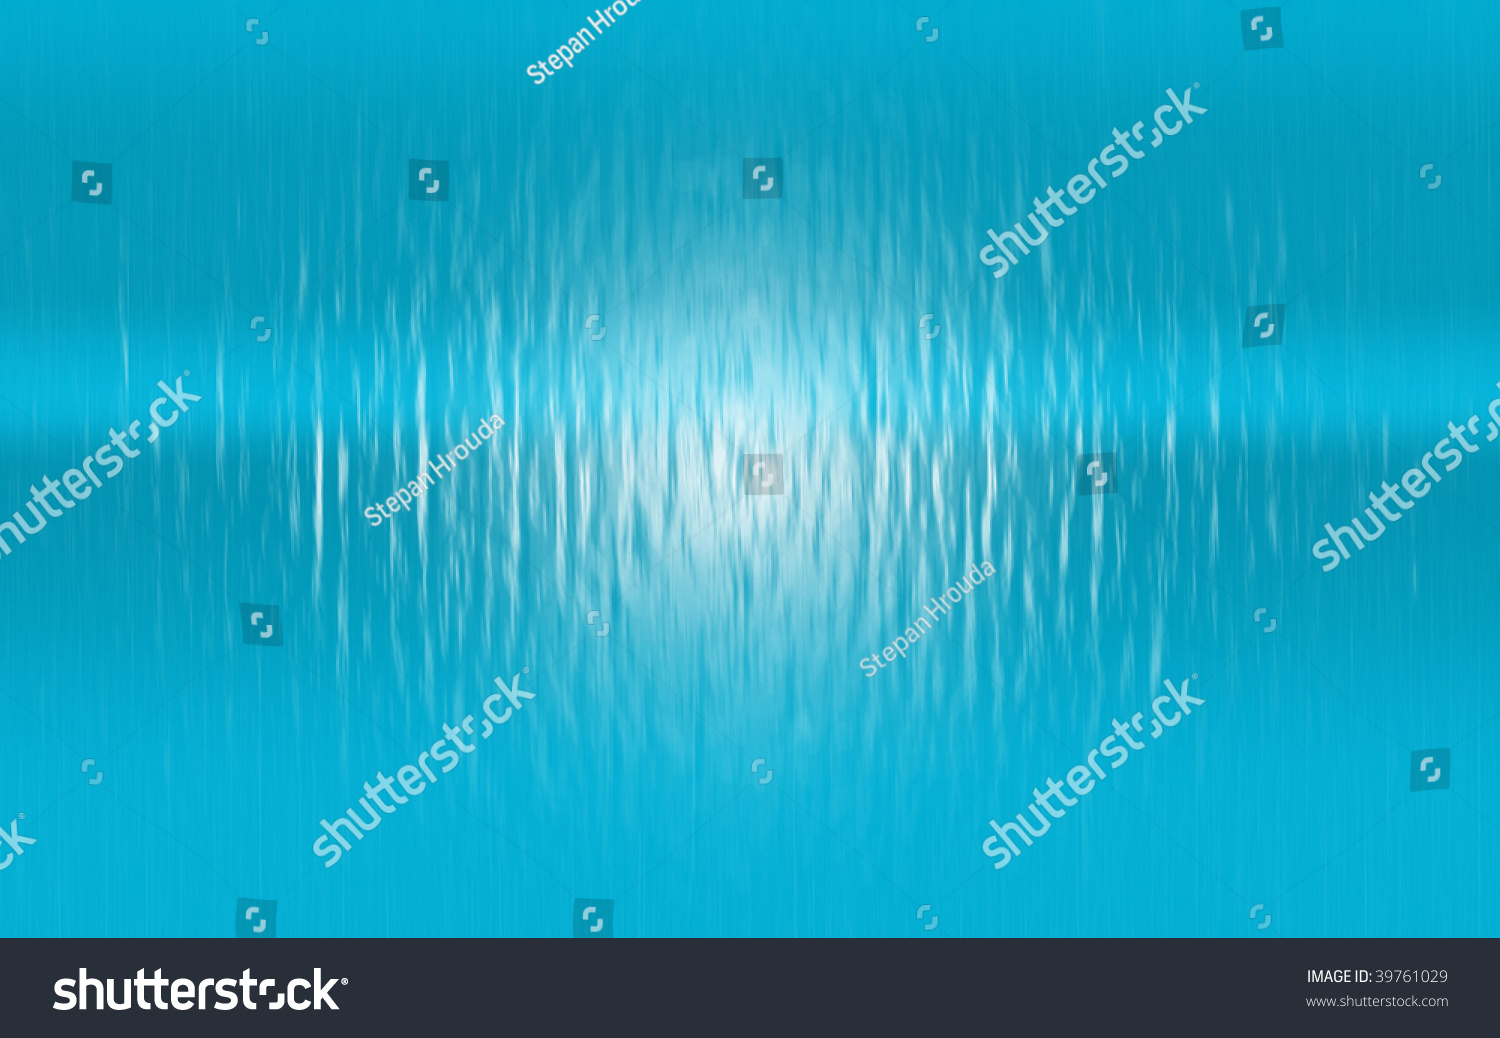 Abstract Teal Background Stock Illustration 39761029 - Shutterstock